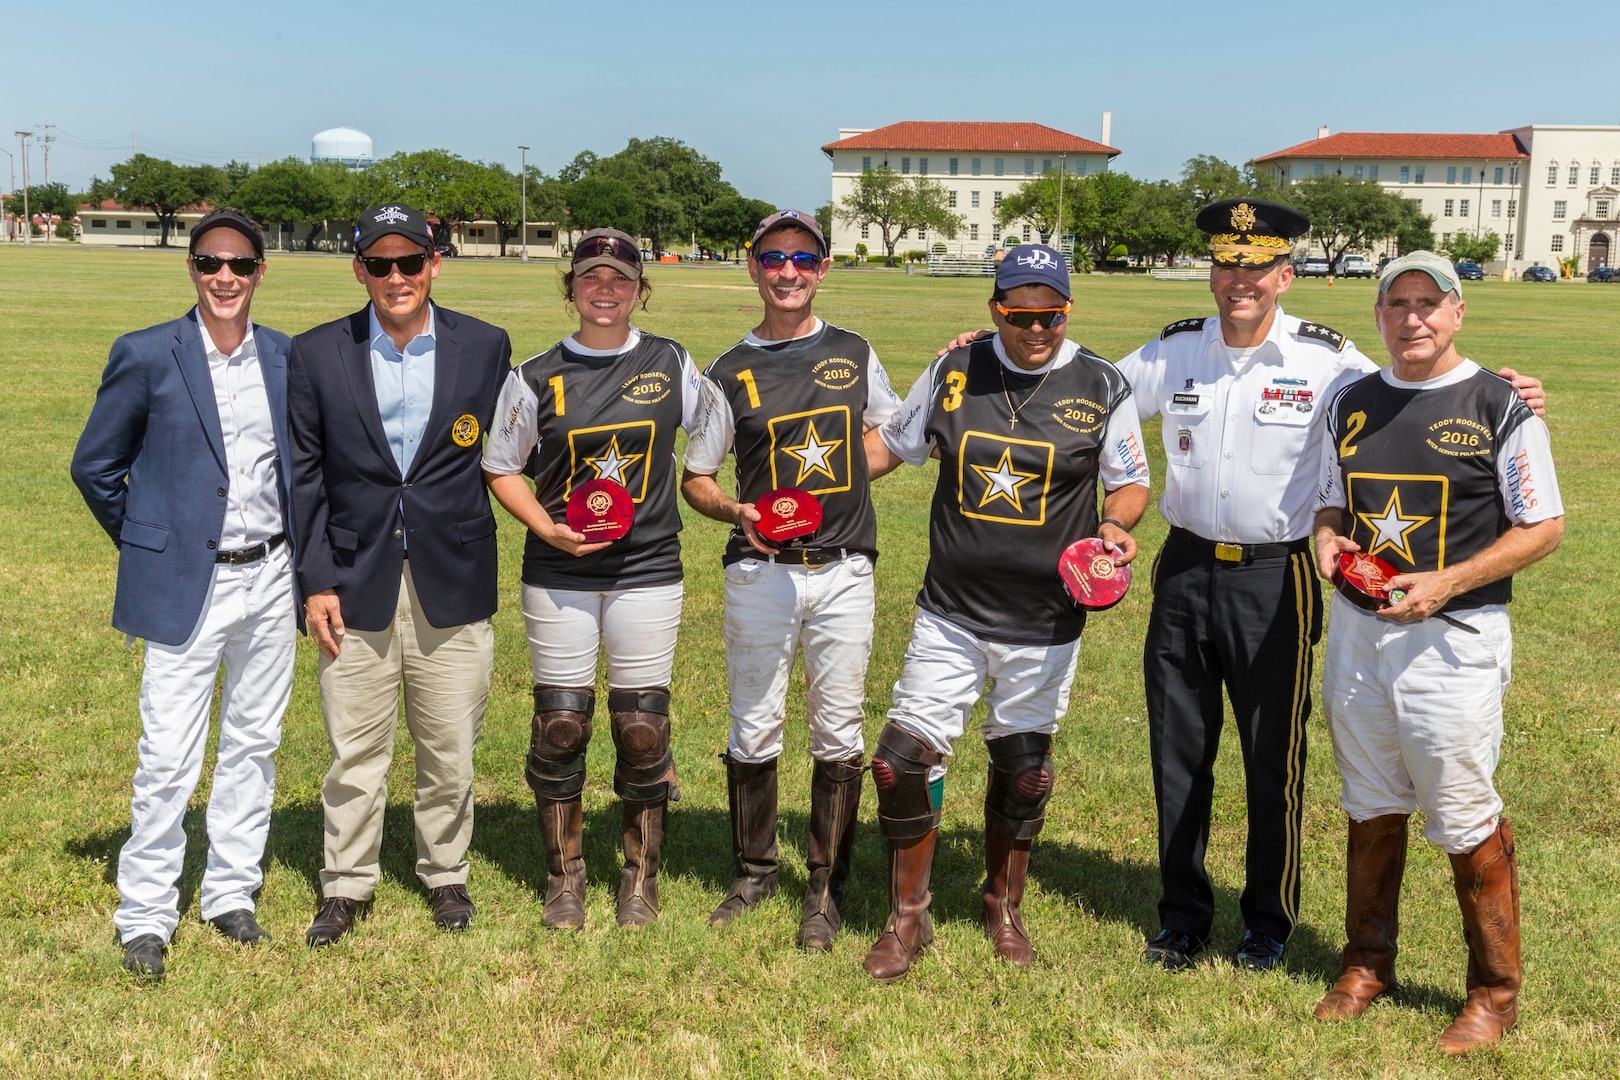 Lt. Gen Jeffrey S. Buchanan (right) , U.S. Army North (Fifth Army) commander, takes a group photo with the winners of the polo match during the annual Military Appreciation Weekend May 6, 2017 at Joint Base San Antonio-Fort Sam Houston, Texas. U.S. Army North and JBSA hosted the two-day event, which featured music, family activities, and various military demonstrations. This year, the appreciation weekend also commemorated the 300th anniversary for the city of San Antonio. (U.S. Air Force photo by Ismael Ortega / Released)